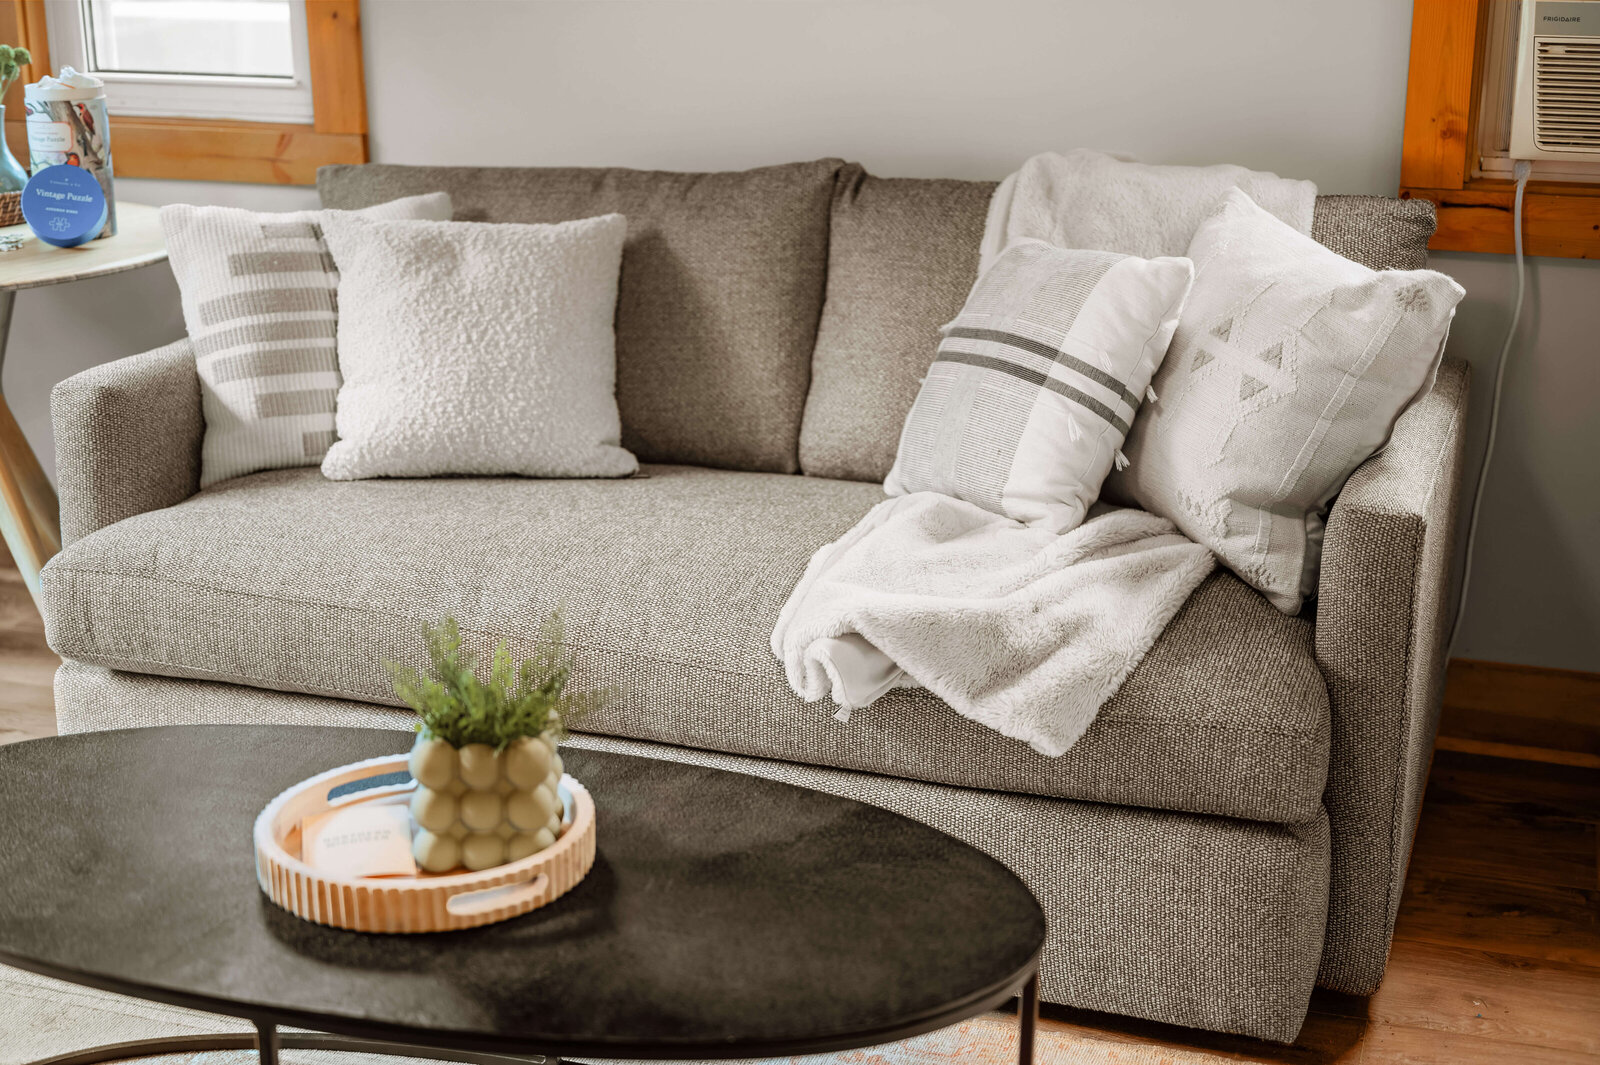 Cozy living space with gray couch